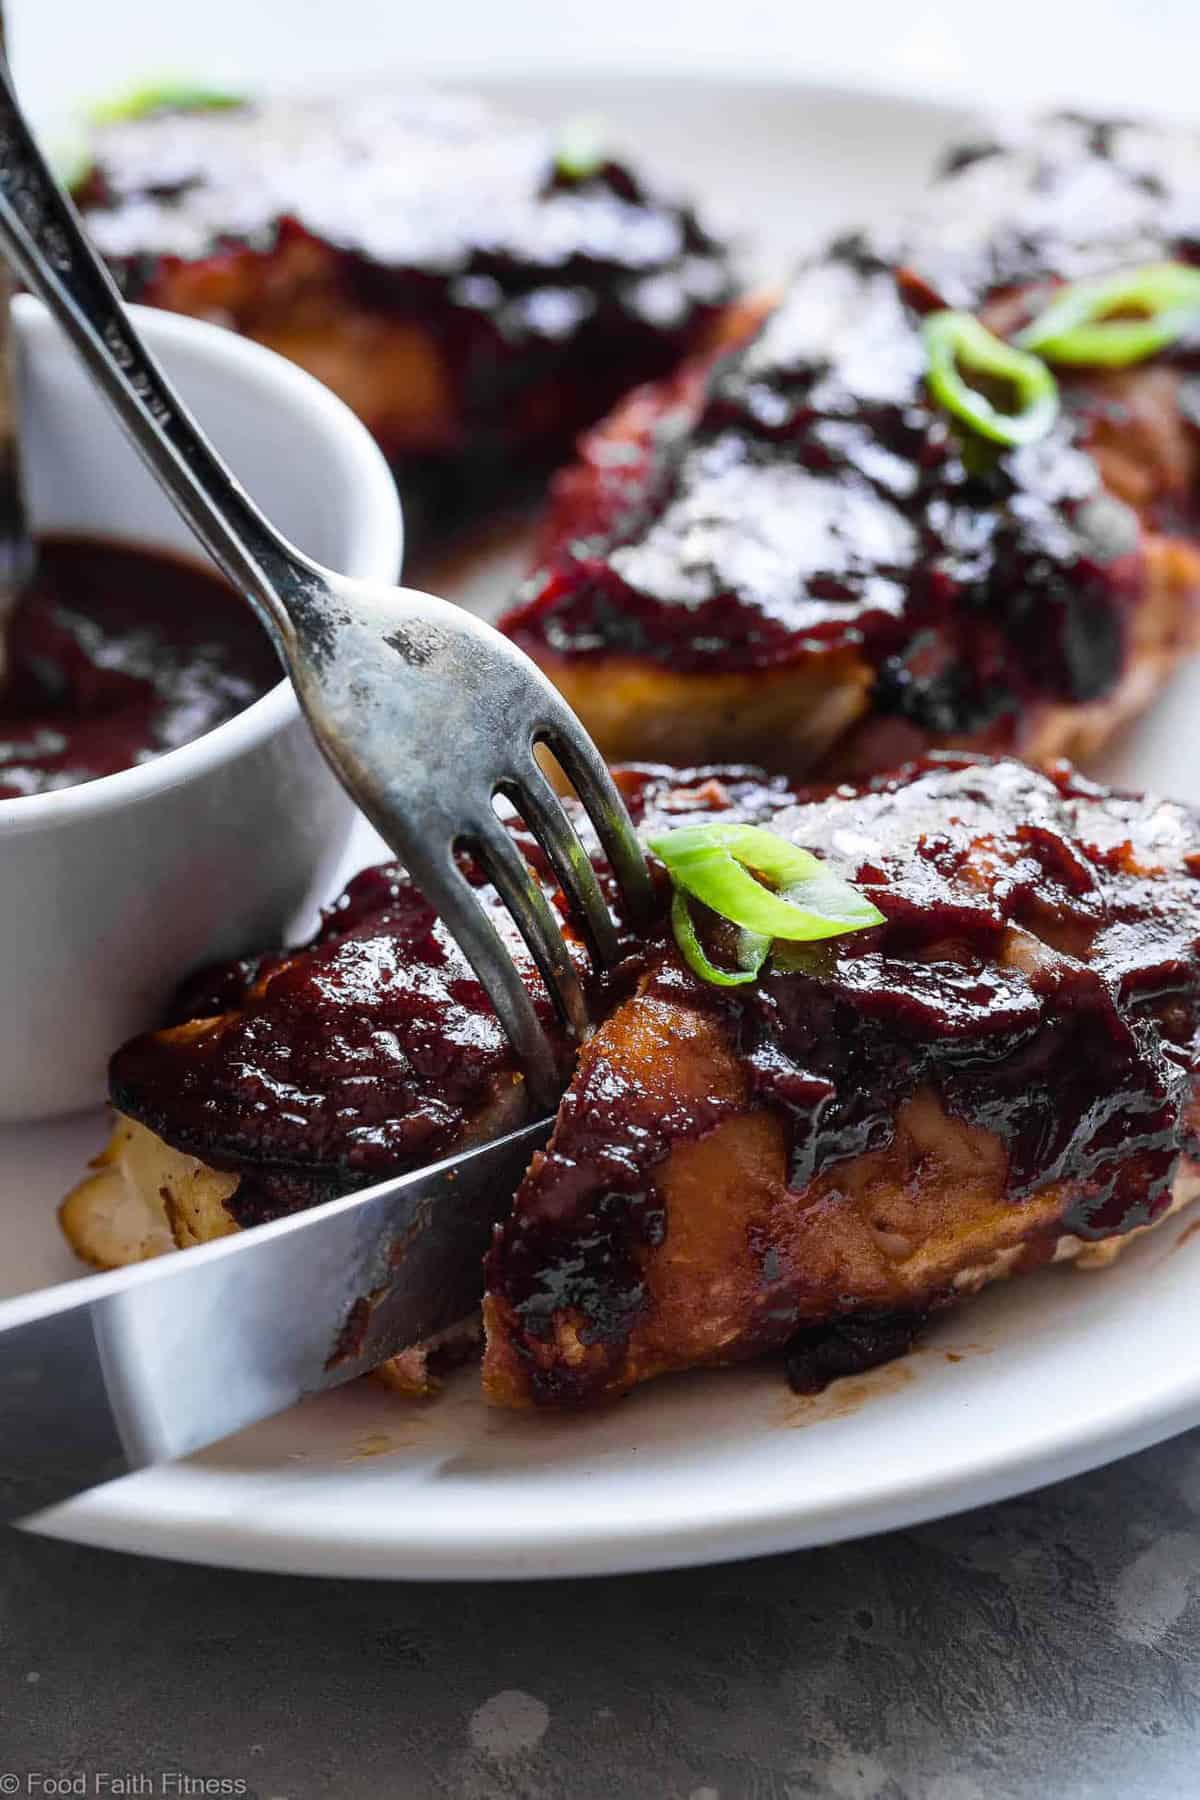 Bacon Wrapped Sweet and Sticky Water Chestnut Chicken - This tastes like a bacon wrapped water chestnut, but in a 30 minute, weeknight, family friendly dinner that is easy, paleo and whole30 friendly! Only 210 calories and sugar free too! | #Foodfaithfitness | #Glutenfree #Paleo #Whole30 #Grainfree #healthy